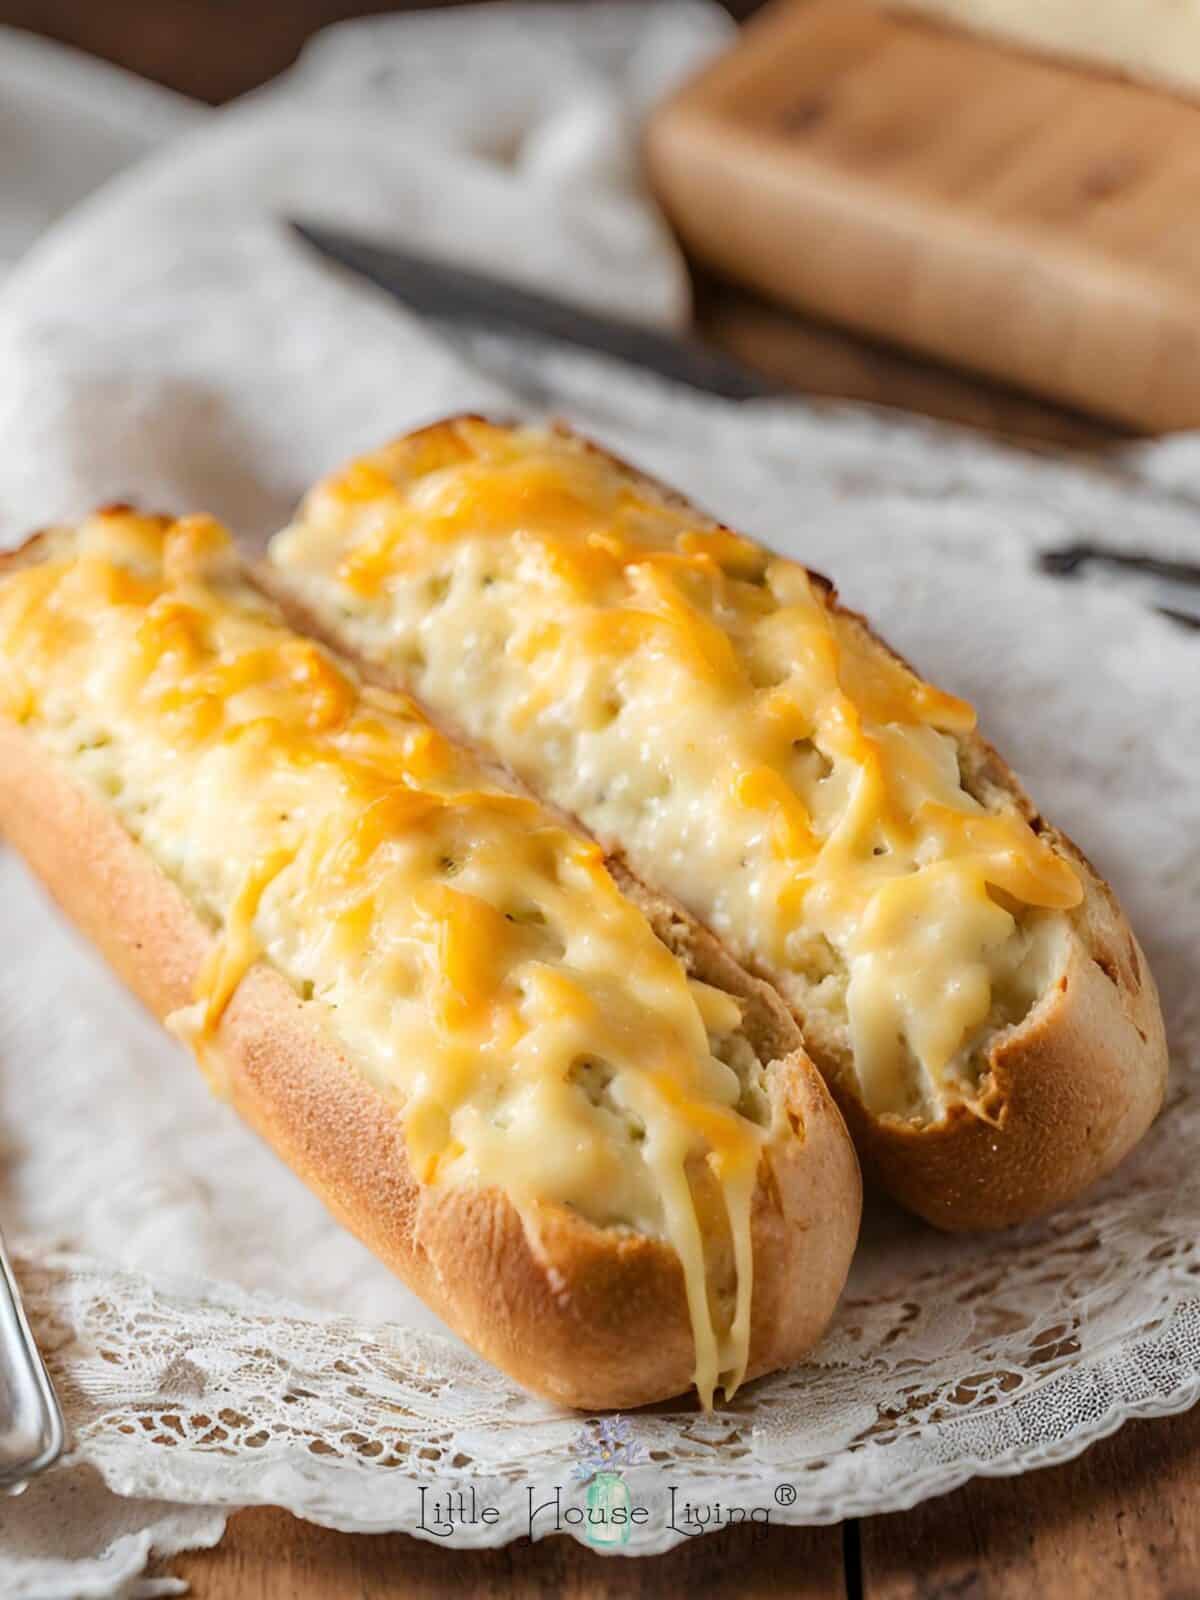 Cheesy French bread on a lace placemat on a wooden table.